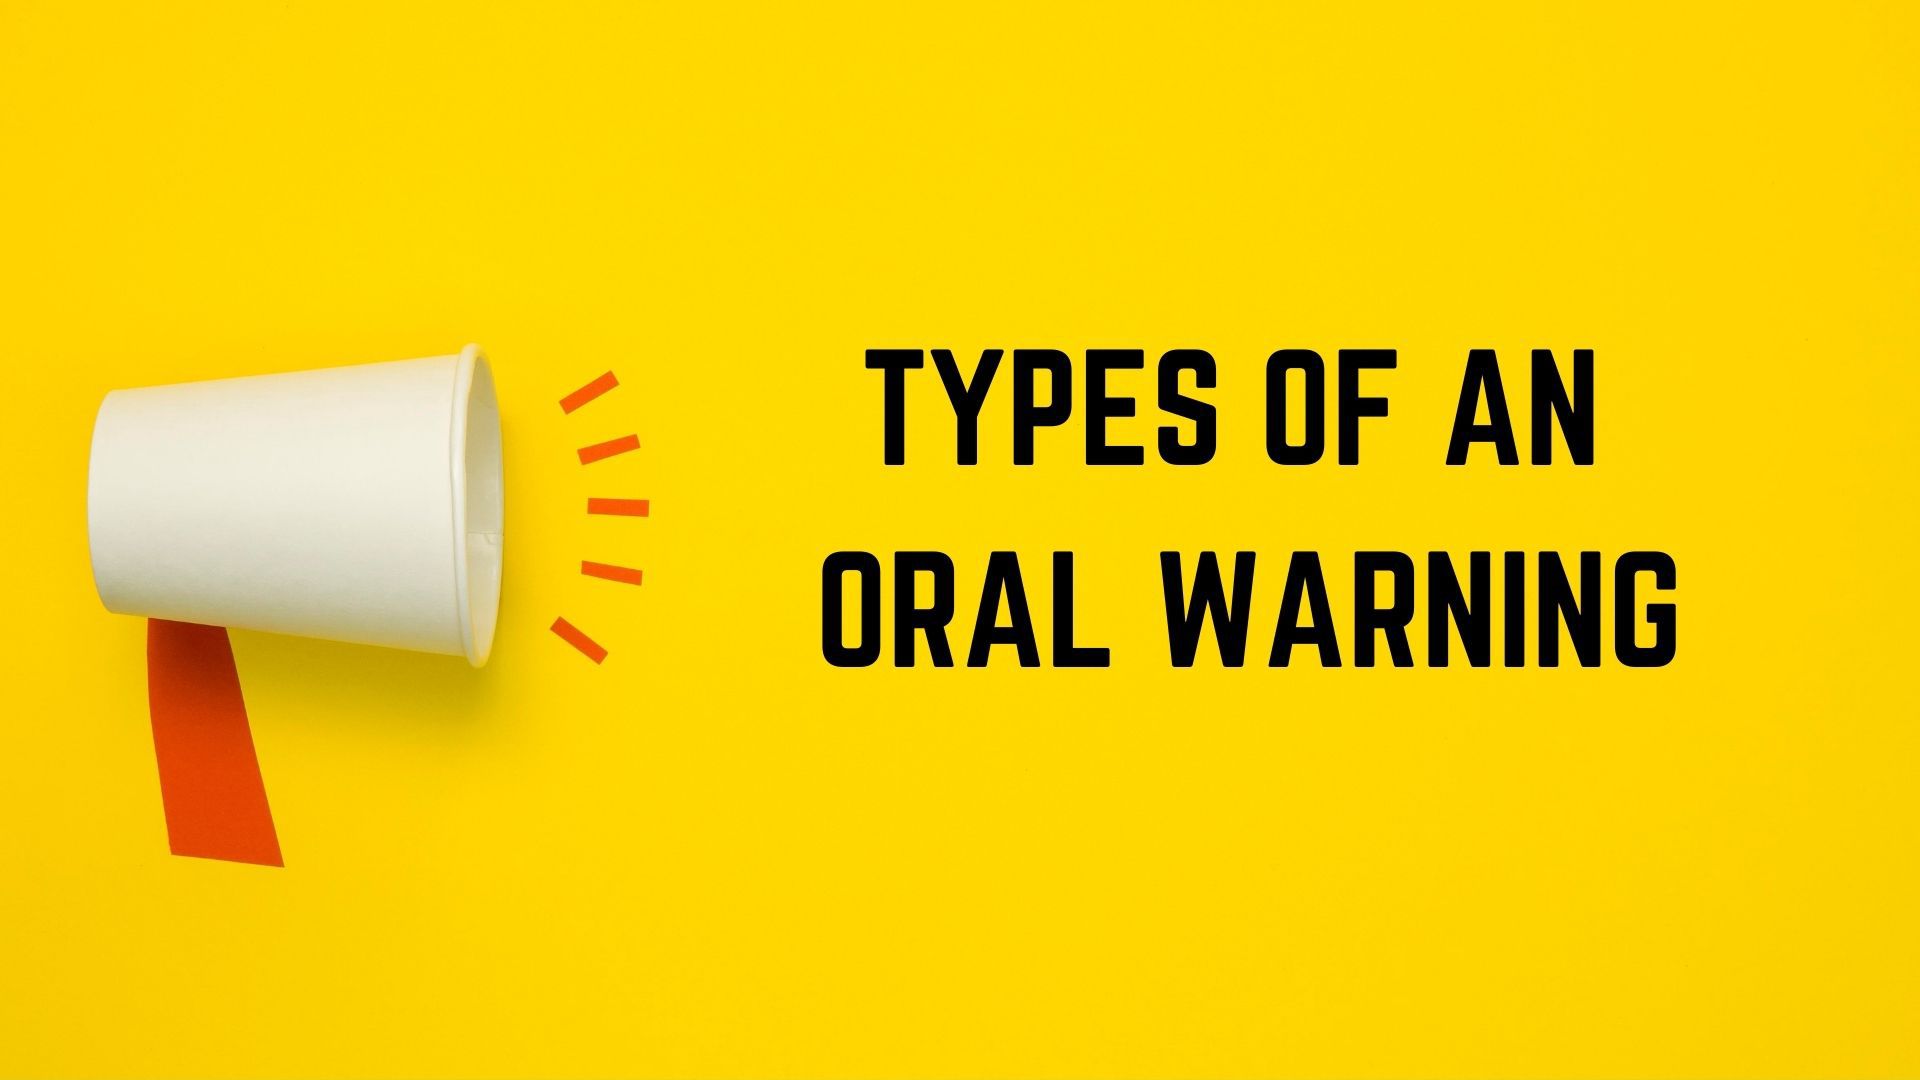 Types of an oral warning